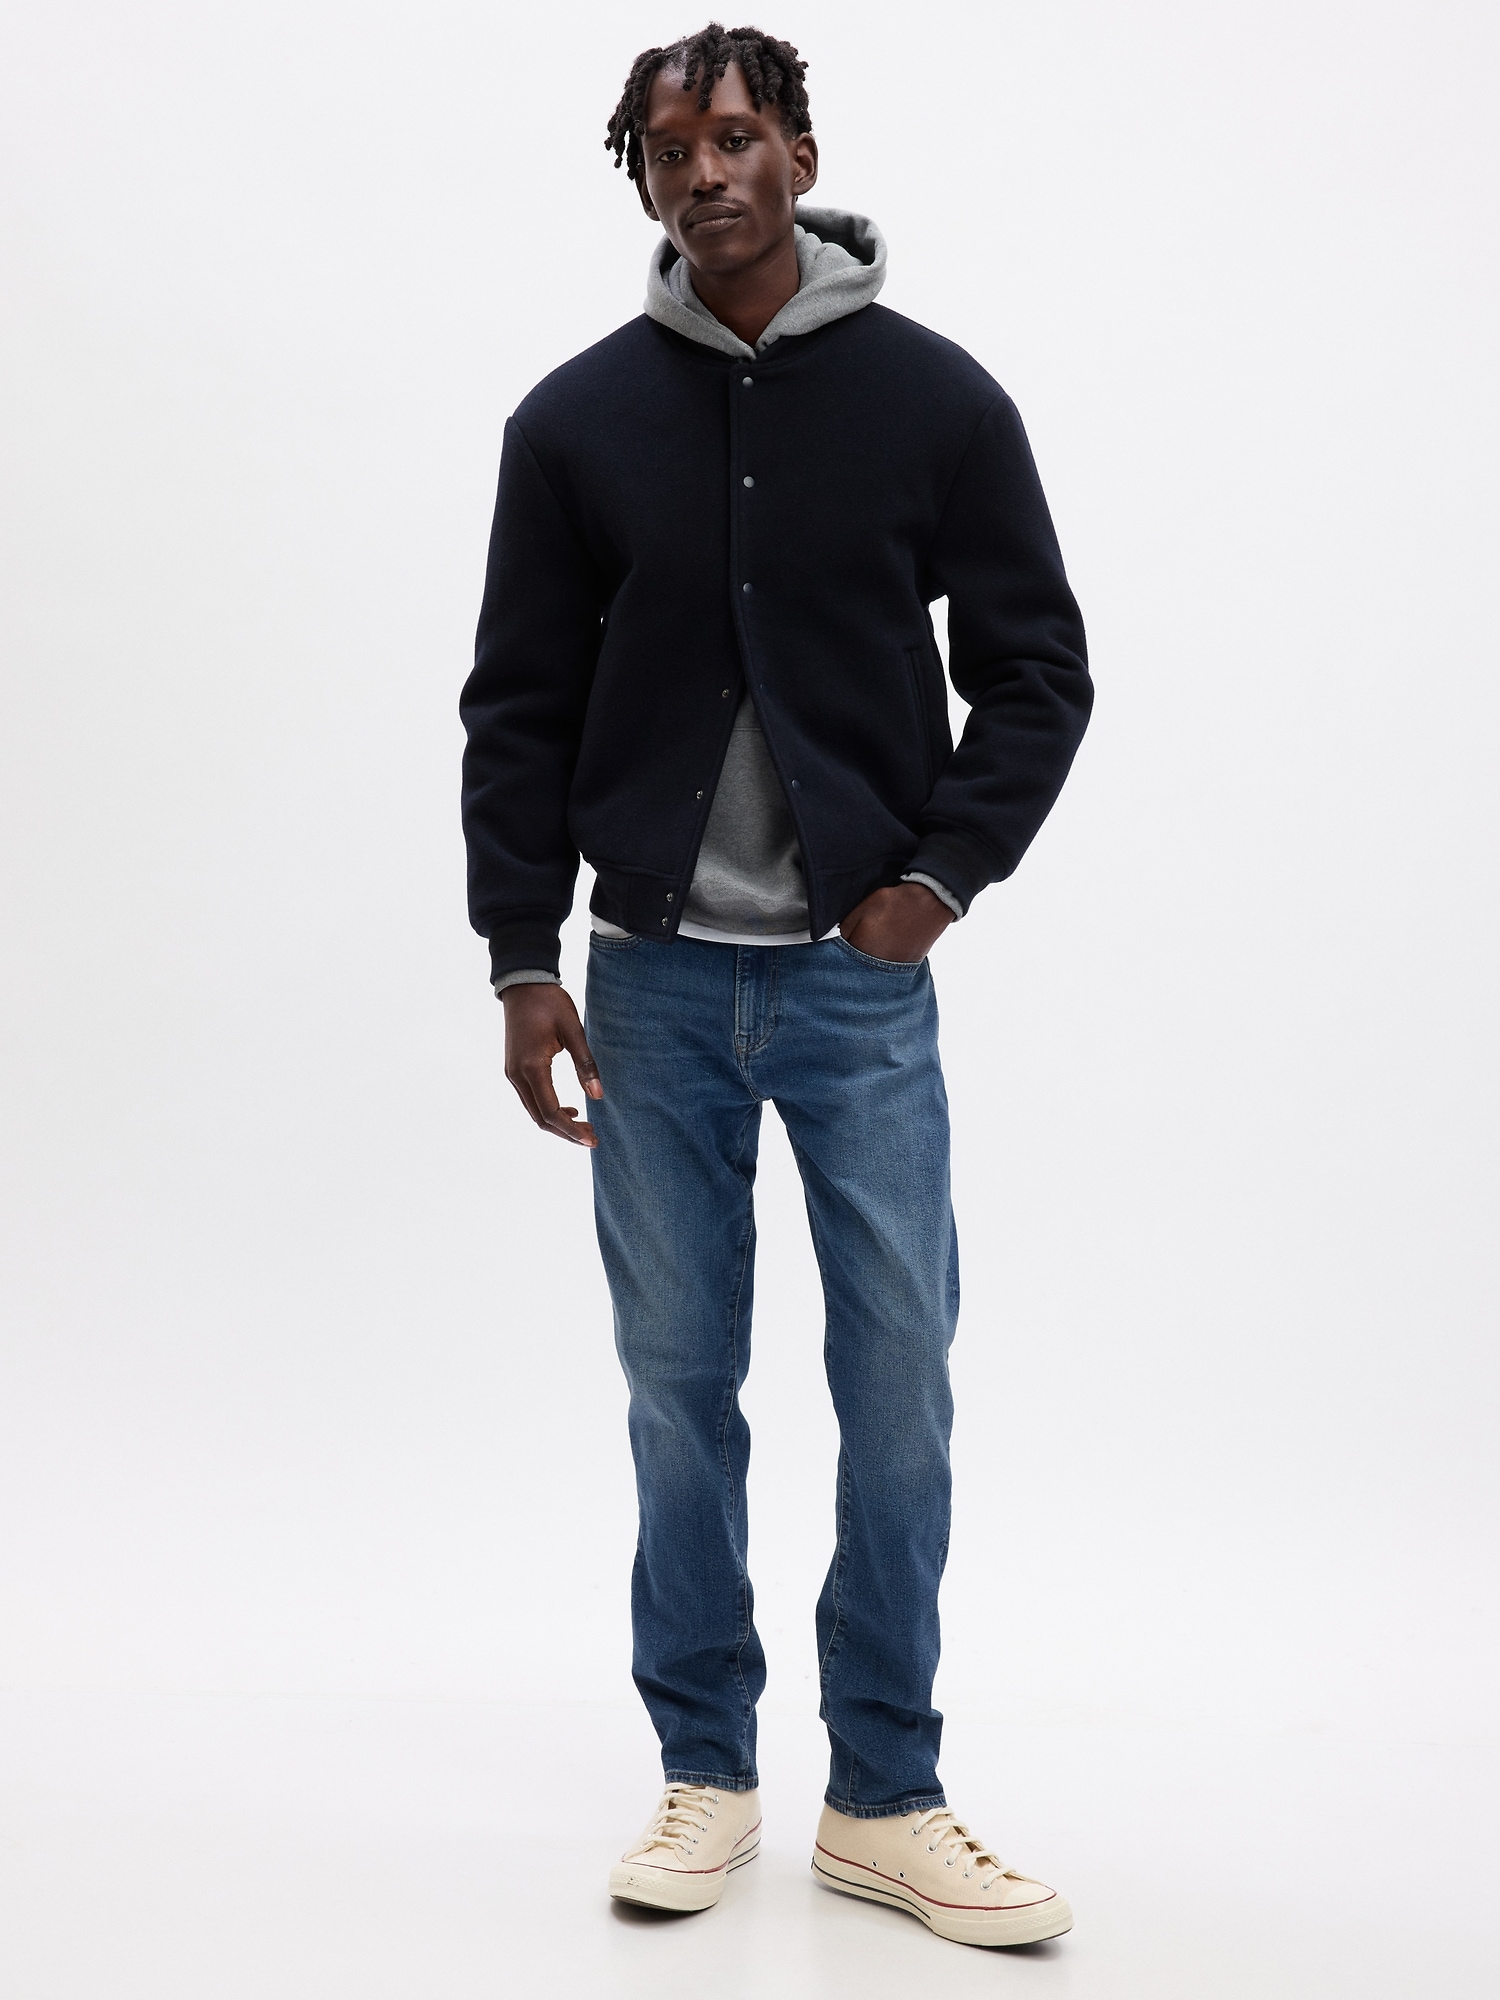 City Jeans in Slim Fit with GapFlex Max